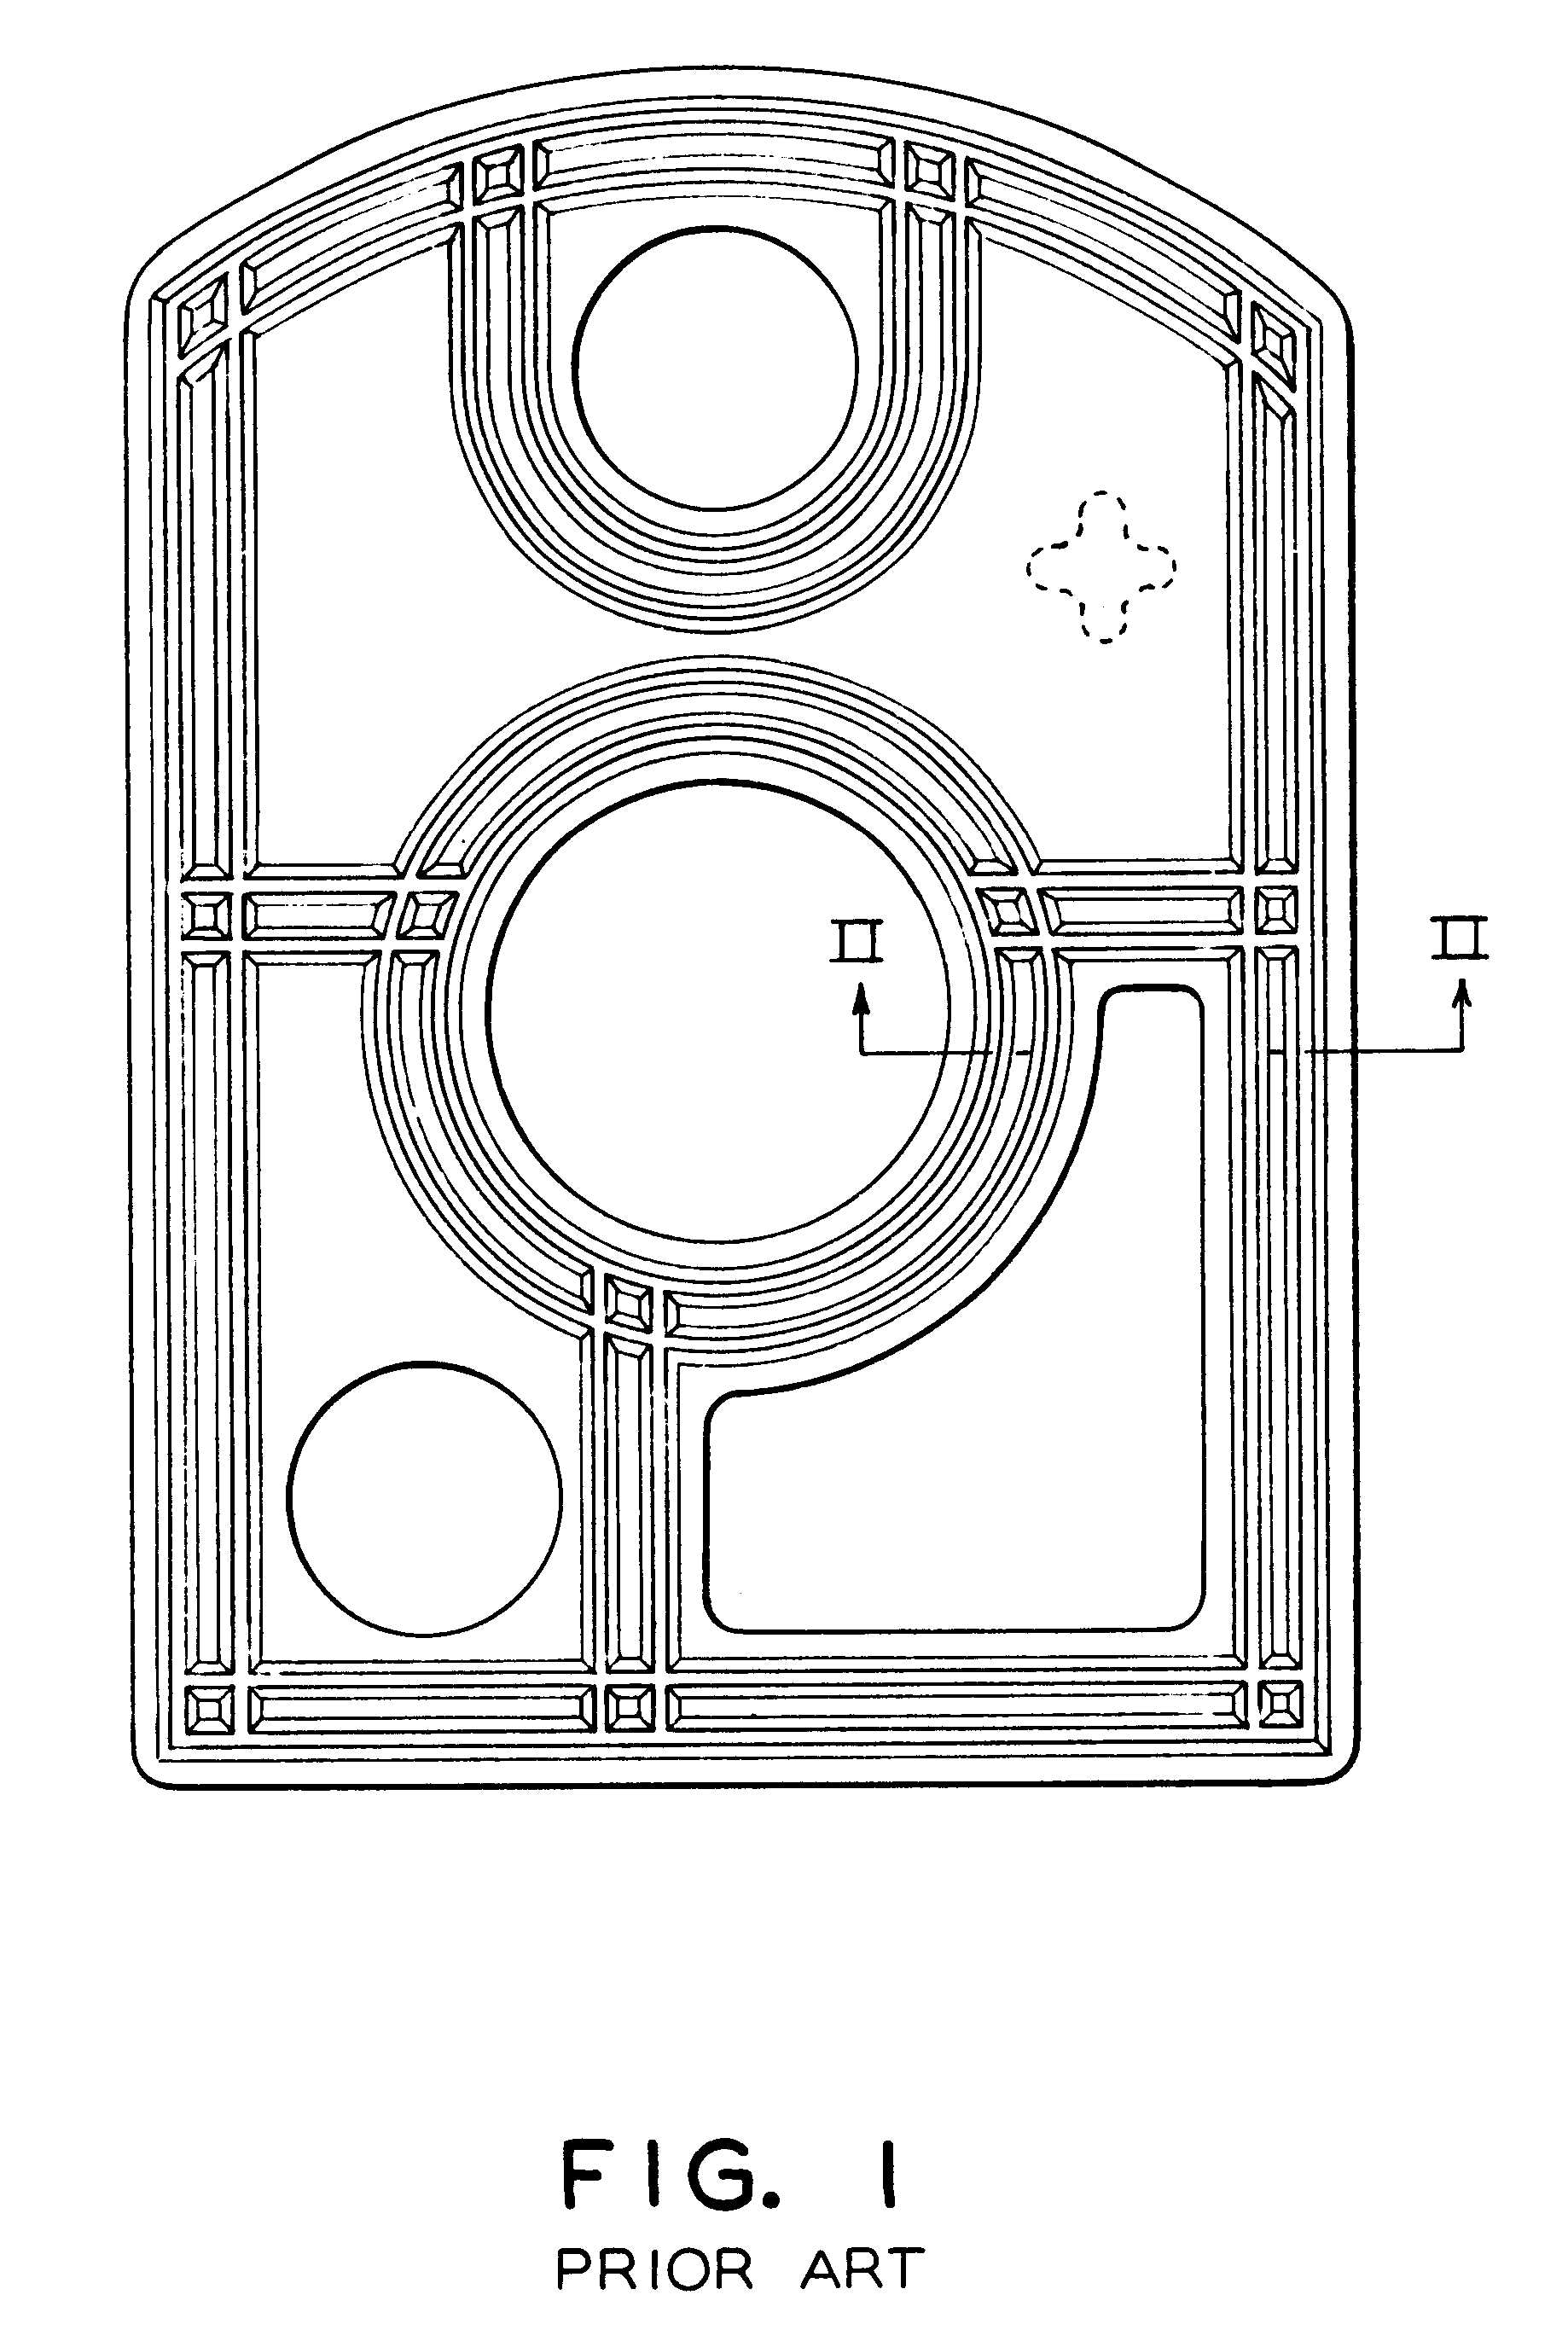 Brass insert molded into "church window" of service accelerated release valve gasket